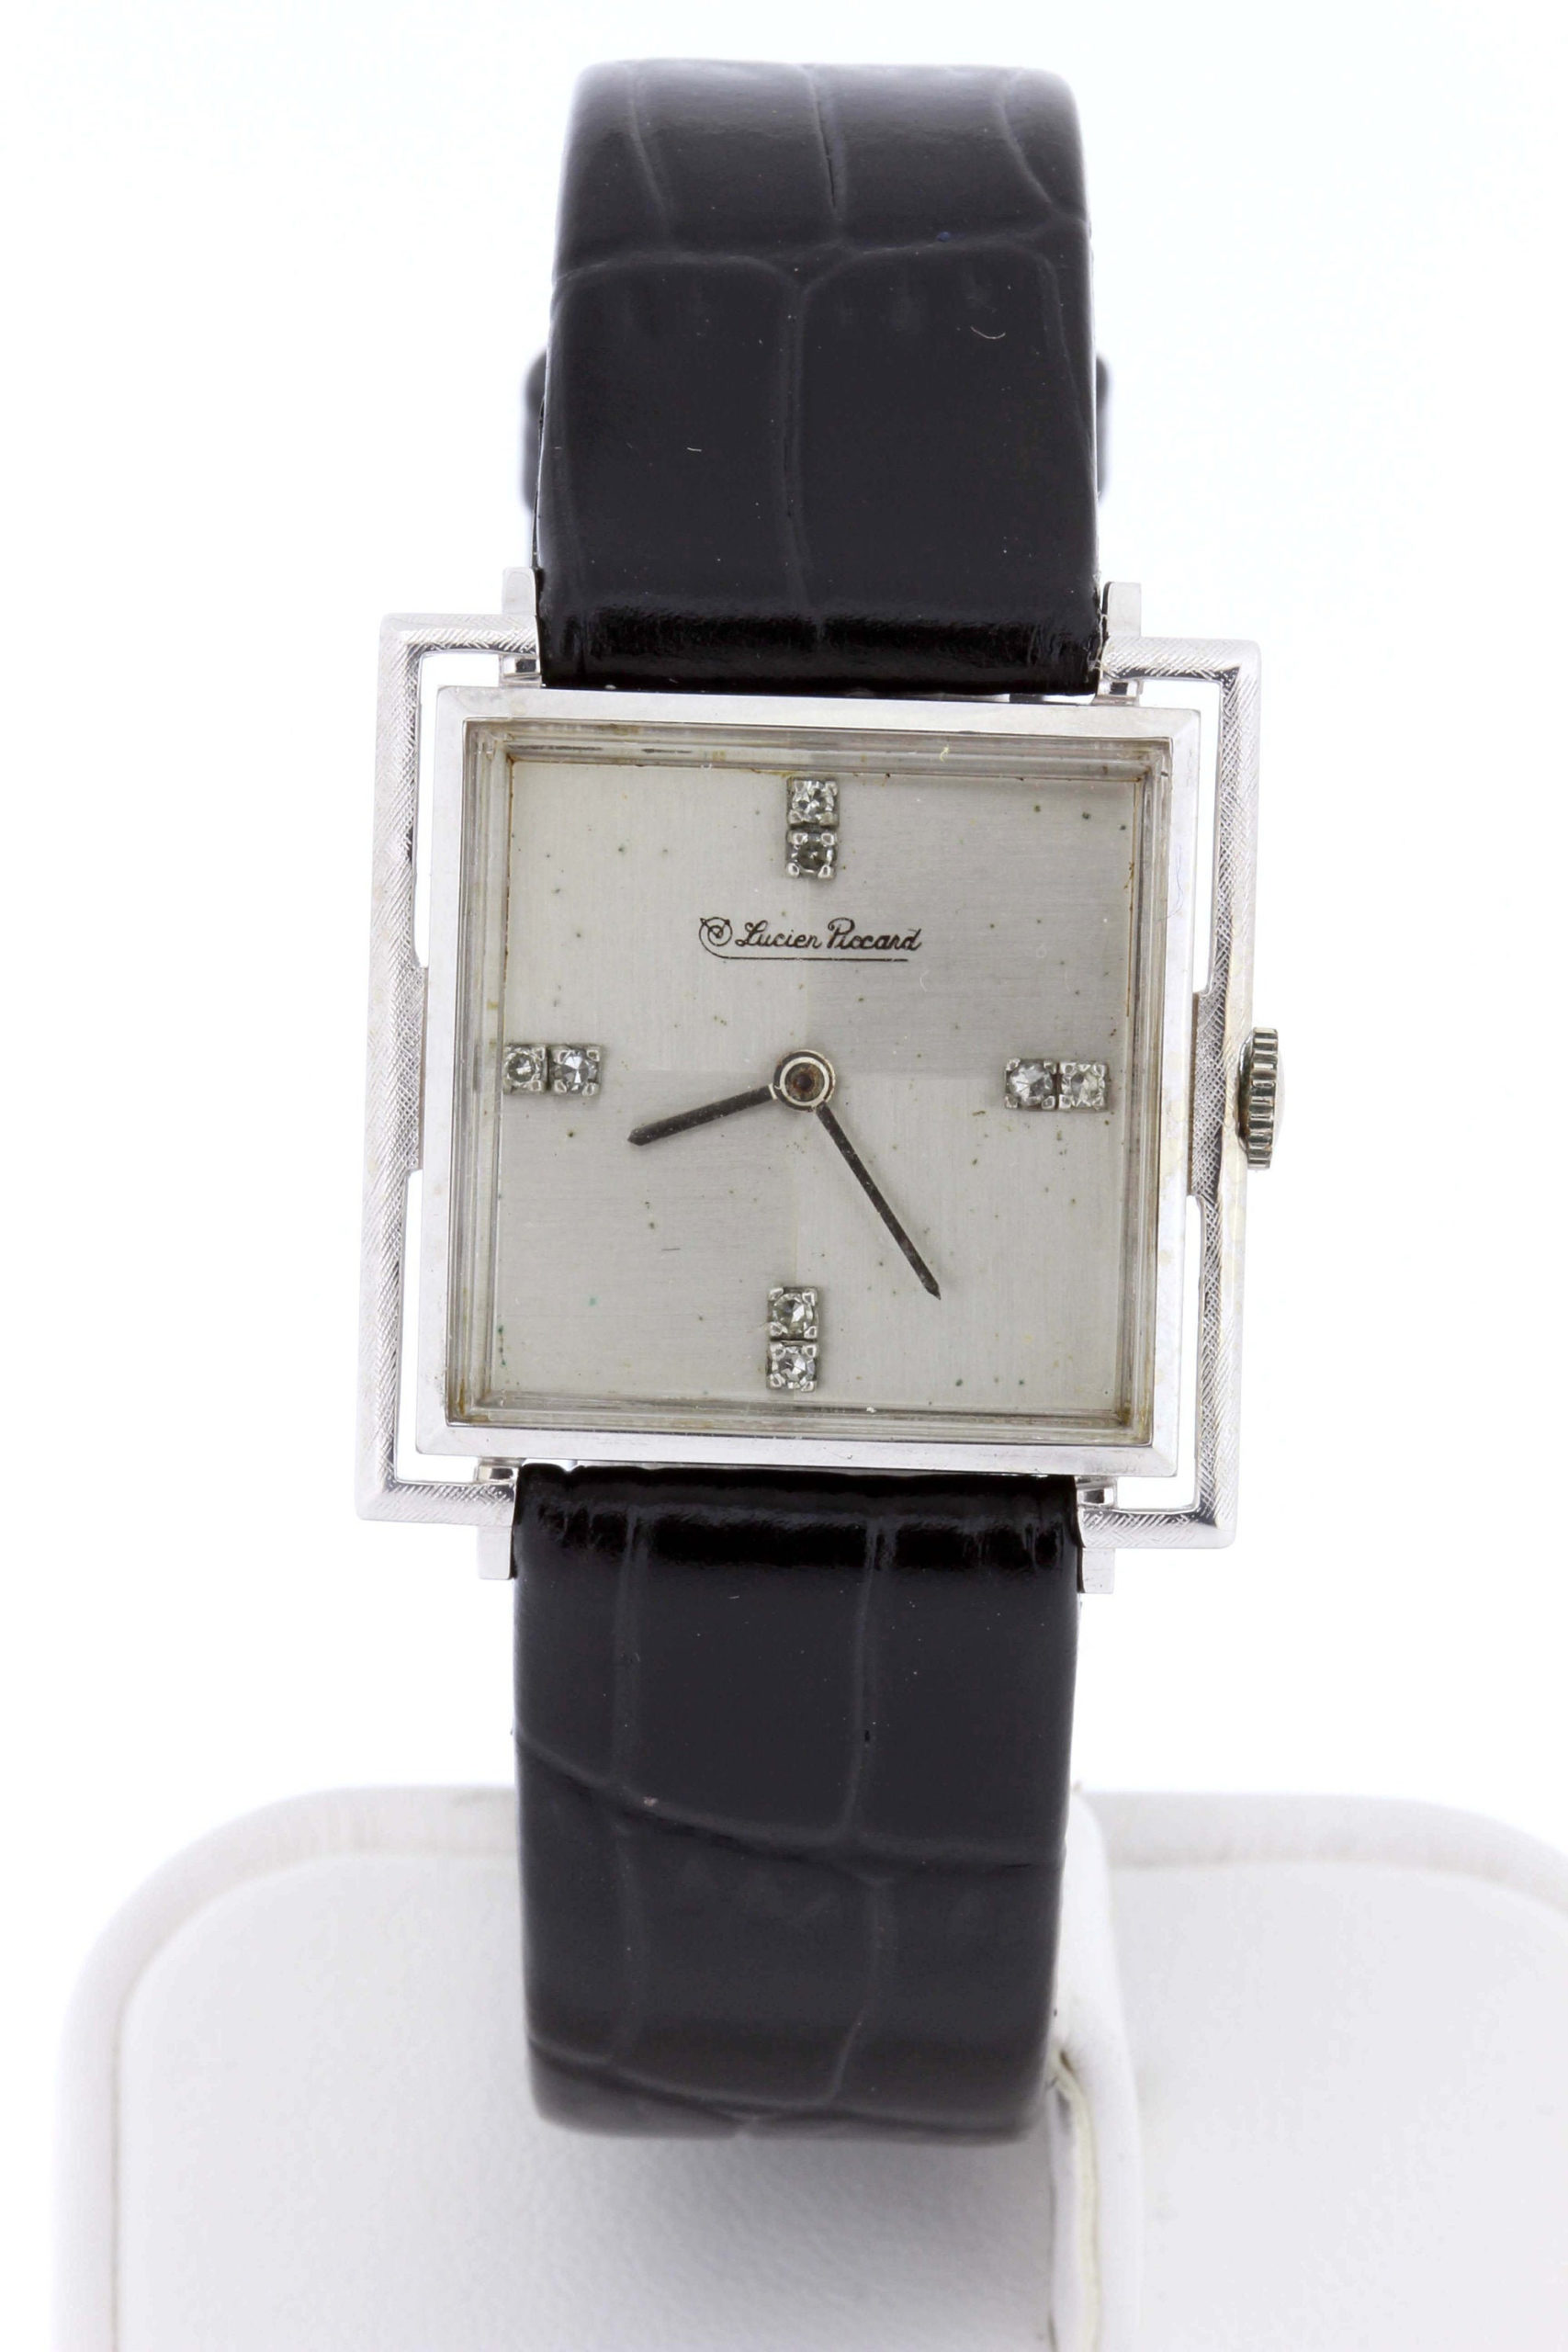 Lucien Piccard Square Watch | tunersread.com